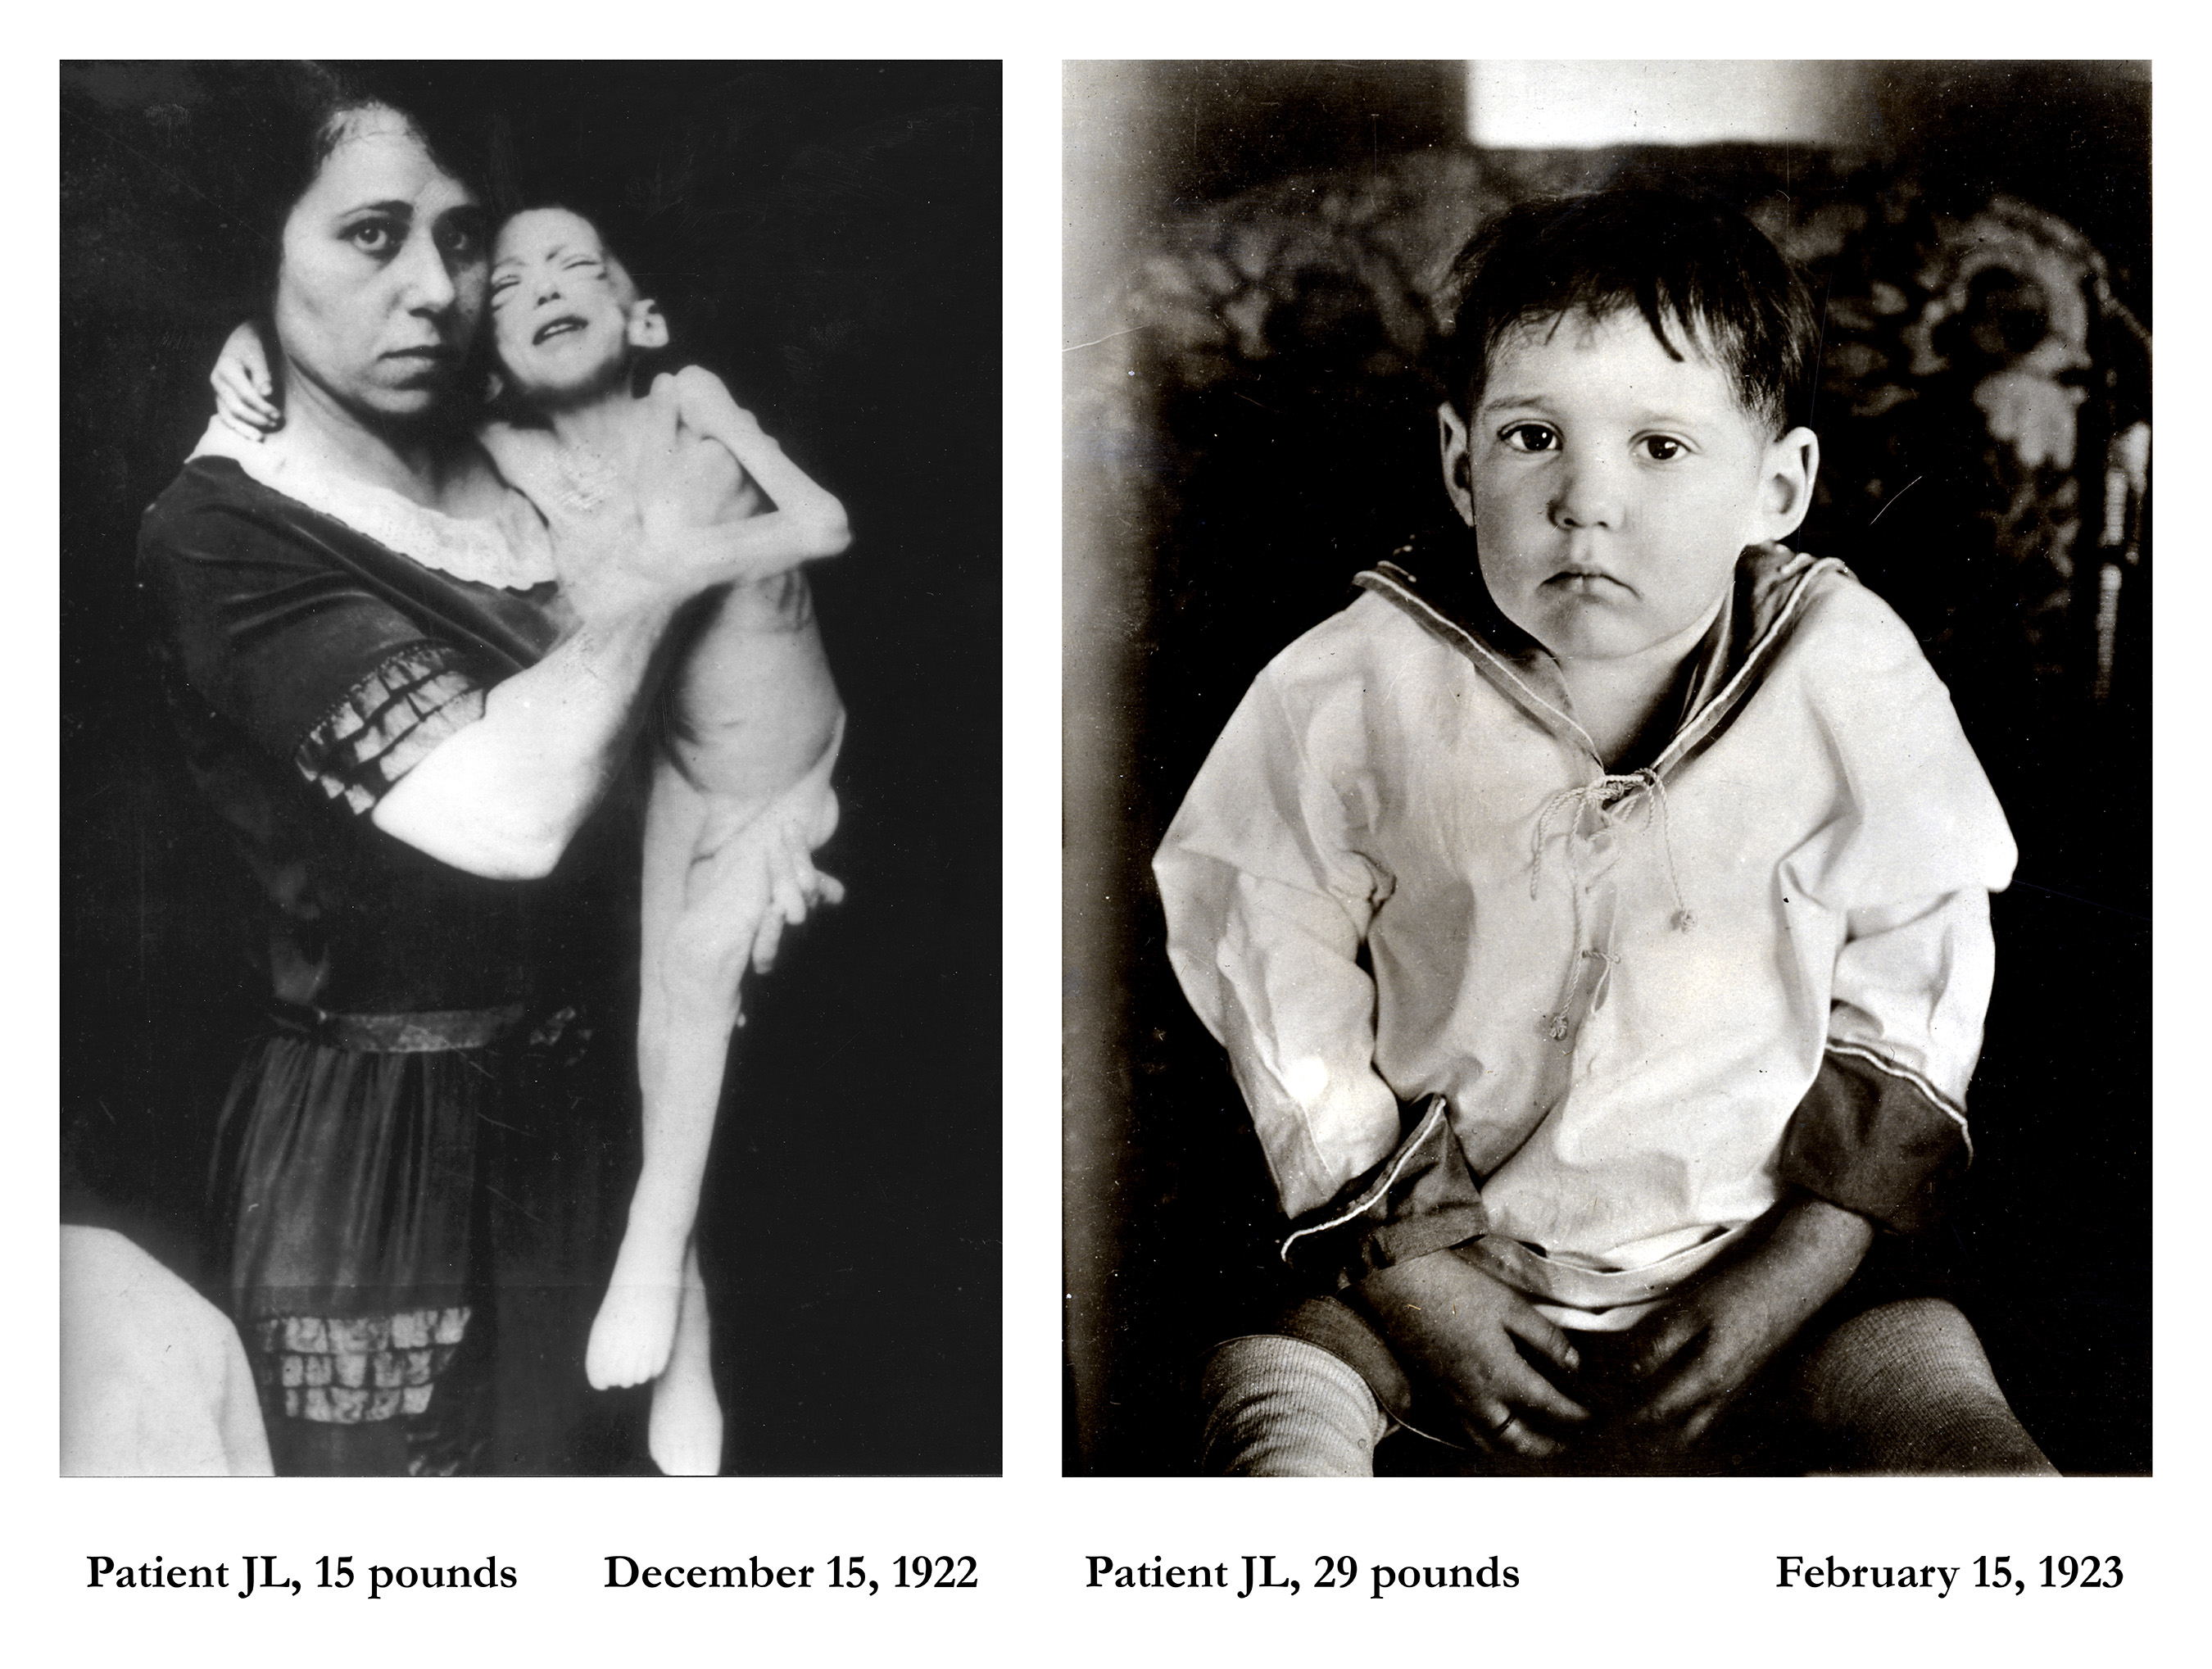 Less than 100 years ago, diabetes was a fatal disease with no treatment other than starvation. In 1923, Lilly collaborated with Canadian scientists Dr. Frederick Banting and Charles Best to overcome production challenges to introduce the world's first commercial insulin product. Featured in this photo is J.L., a child with diabetes before, then two months after, taking 
insulin.